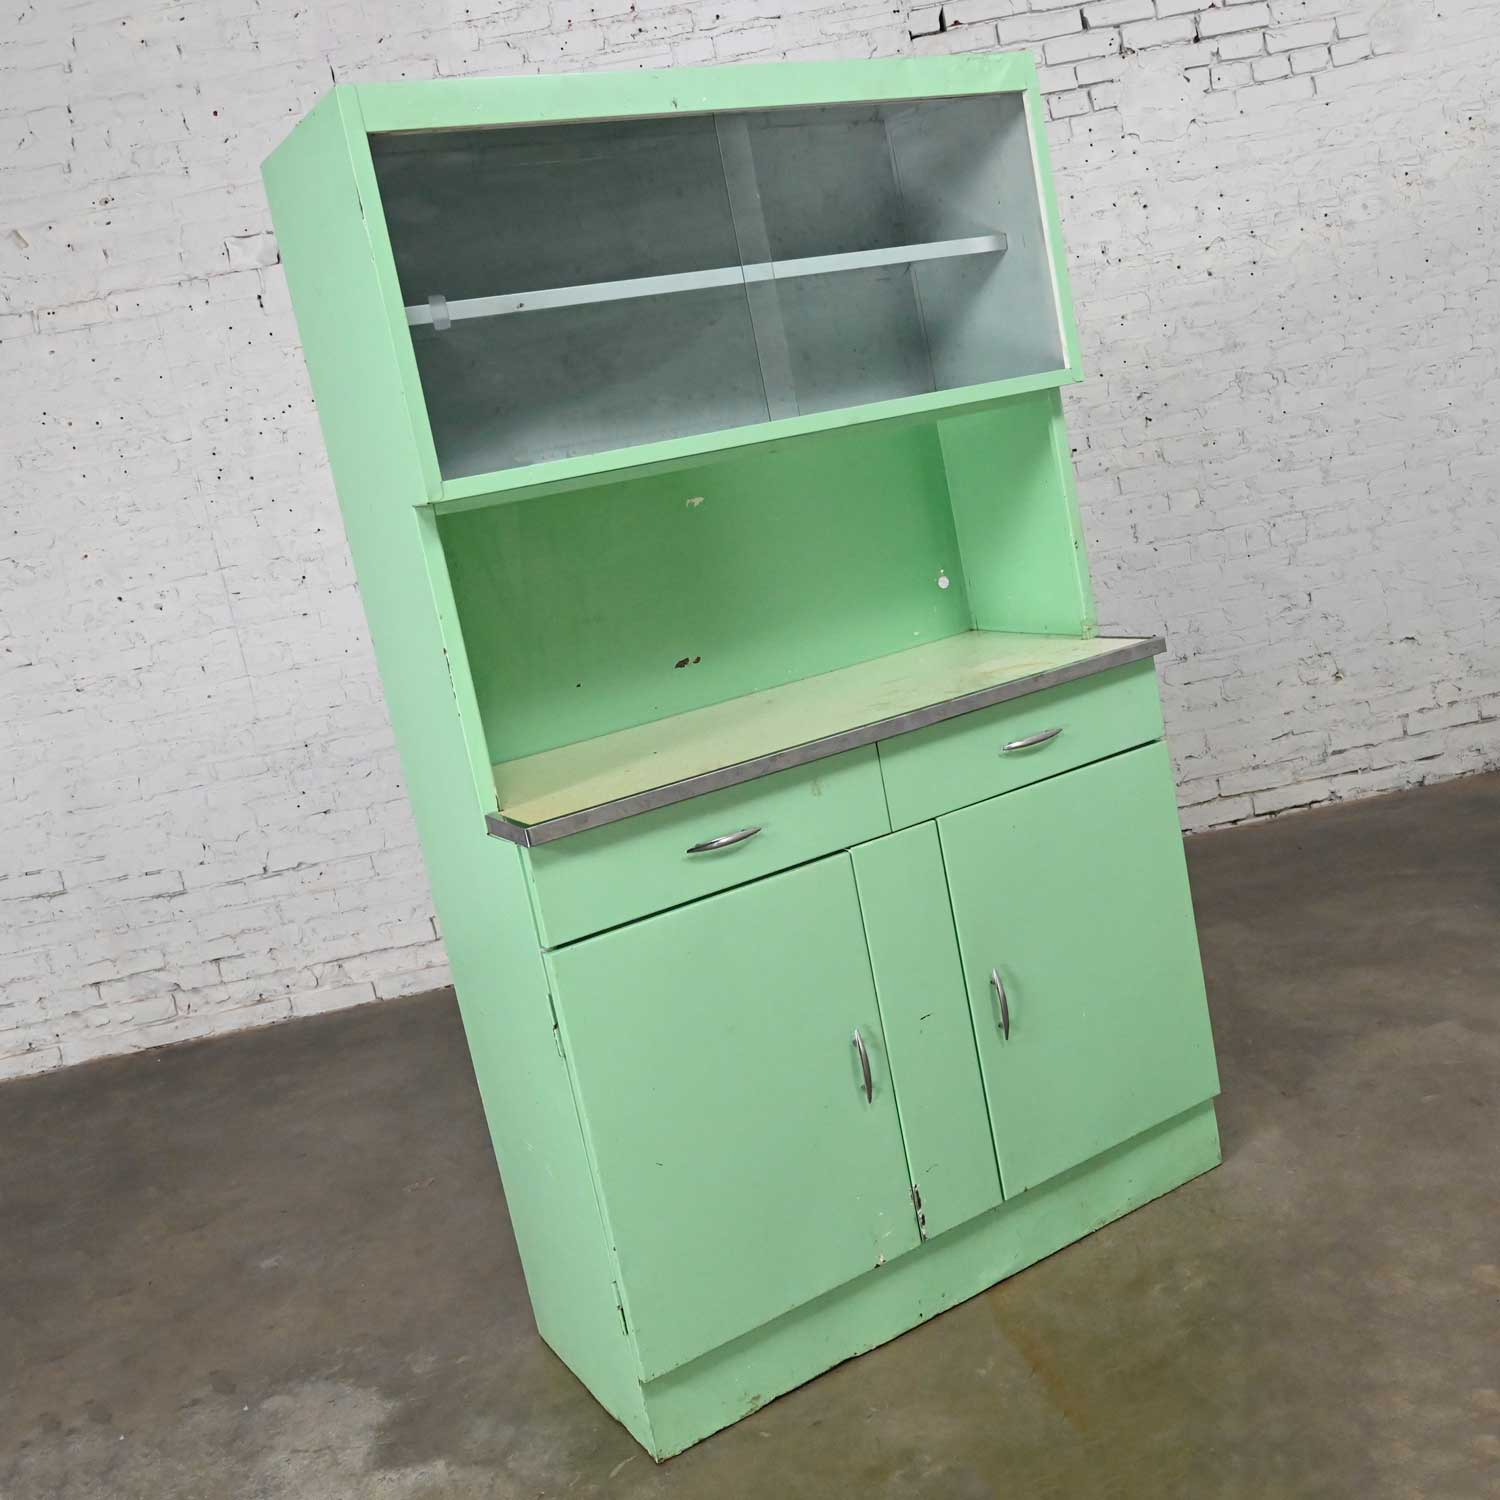 Vintage Industrial Turquoise Metal Cupboard or Cabinet with Upper Glass Doors